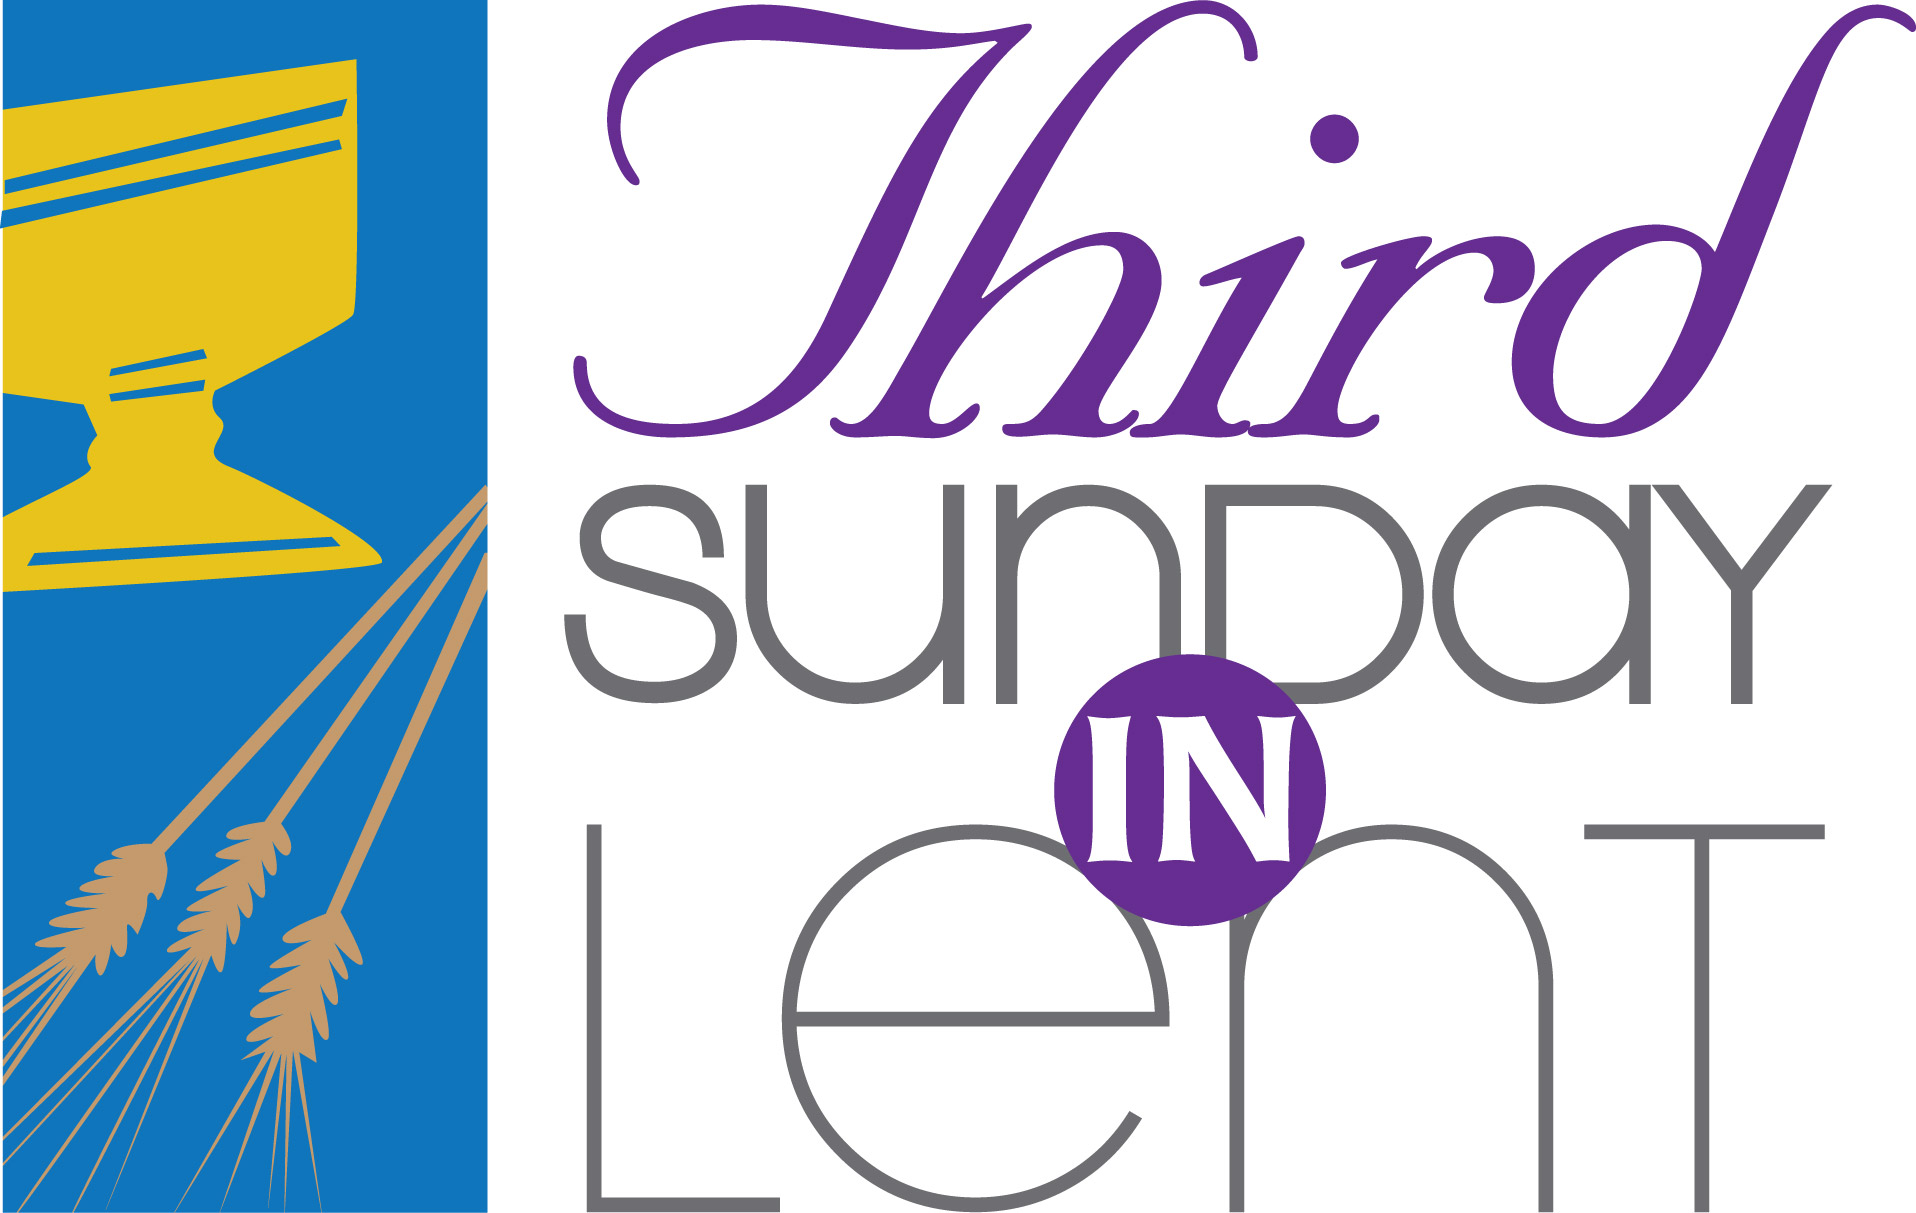 The Third Sunday In Lent